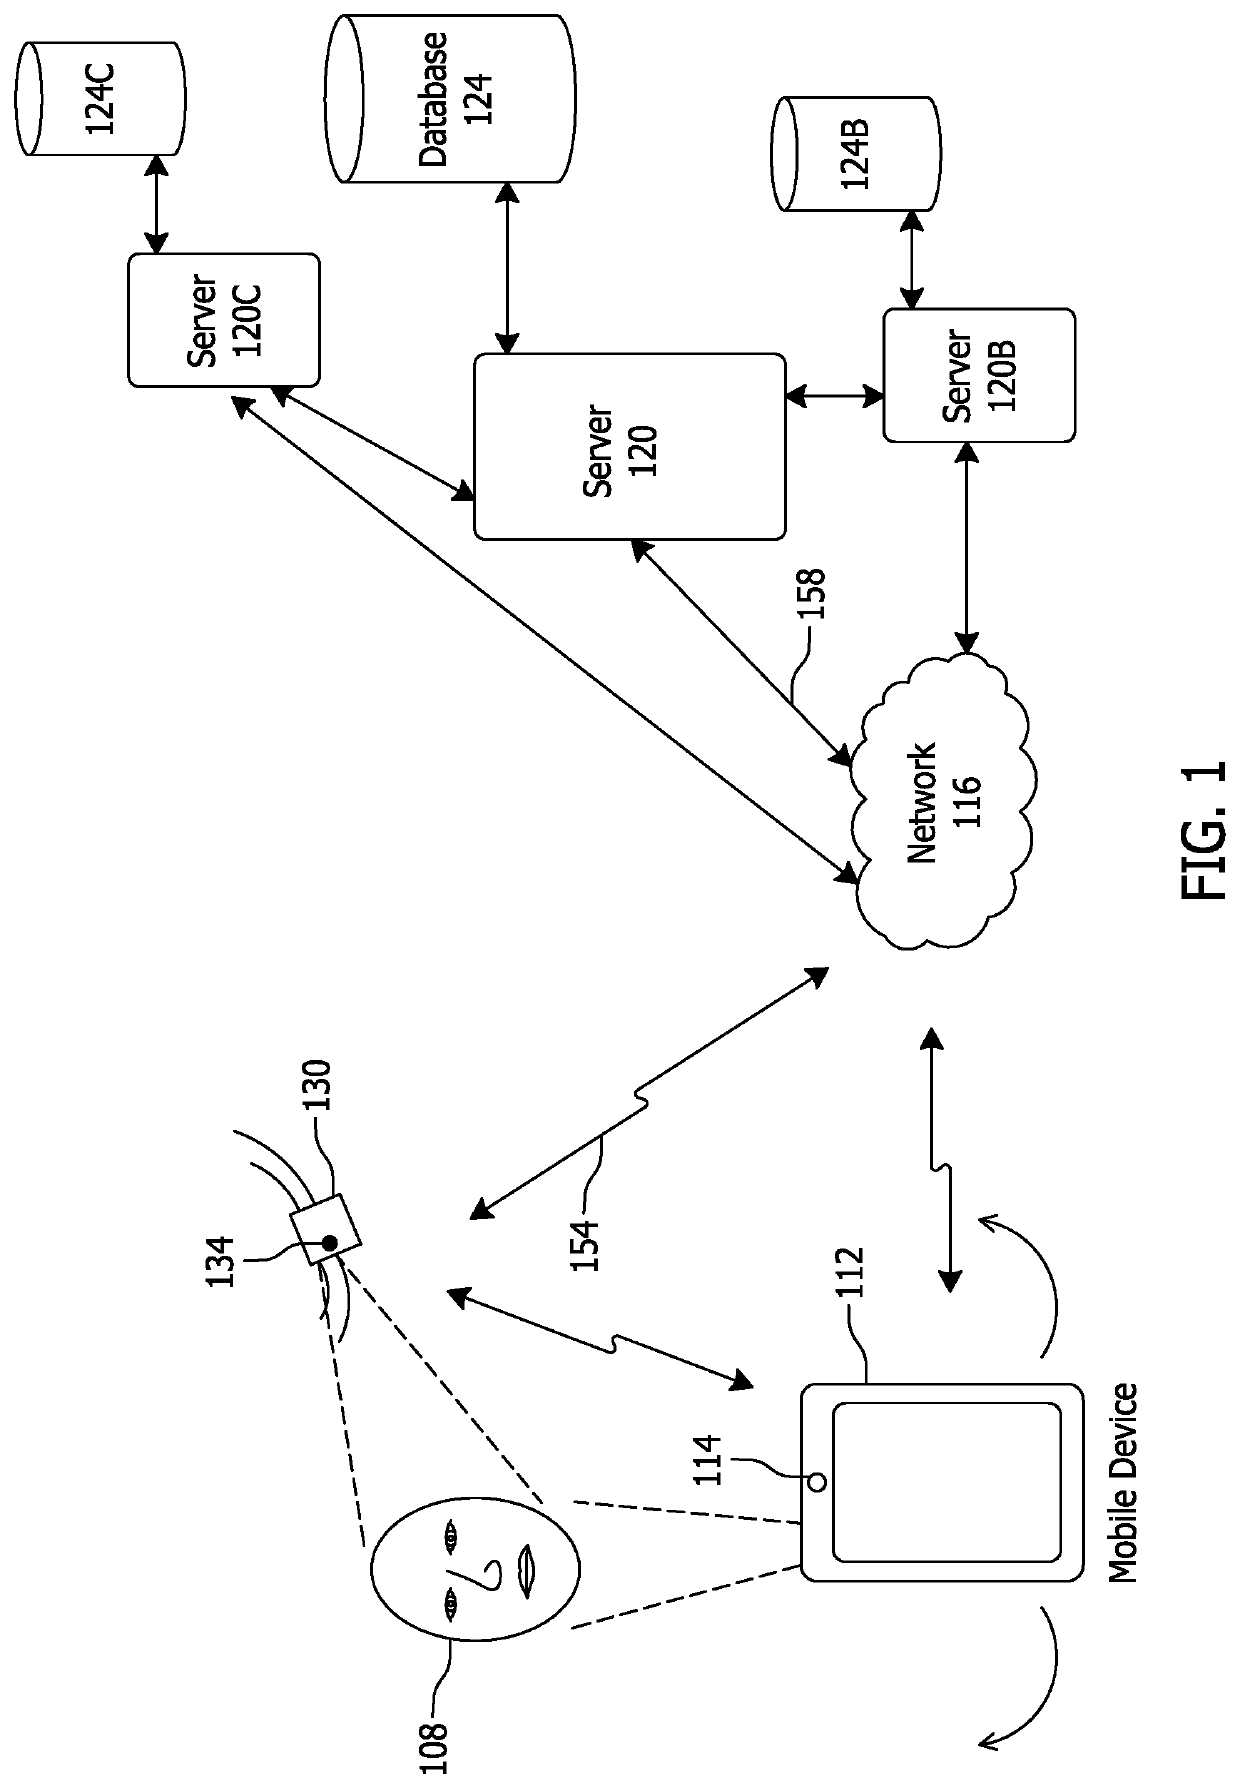 Facial recognition authentication system including path parameters